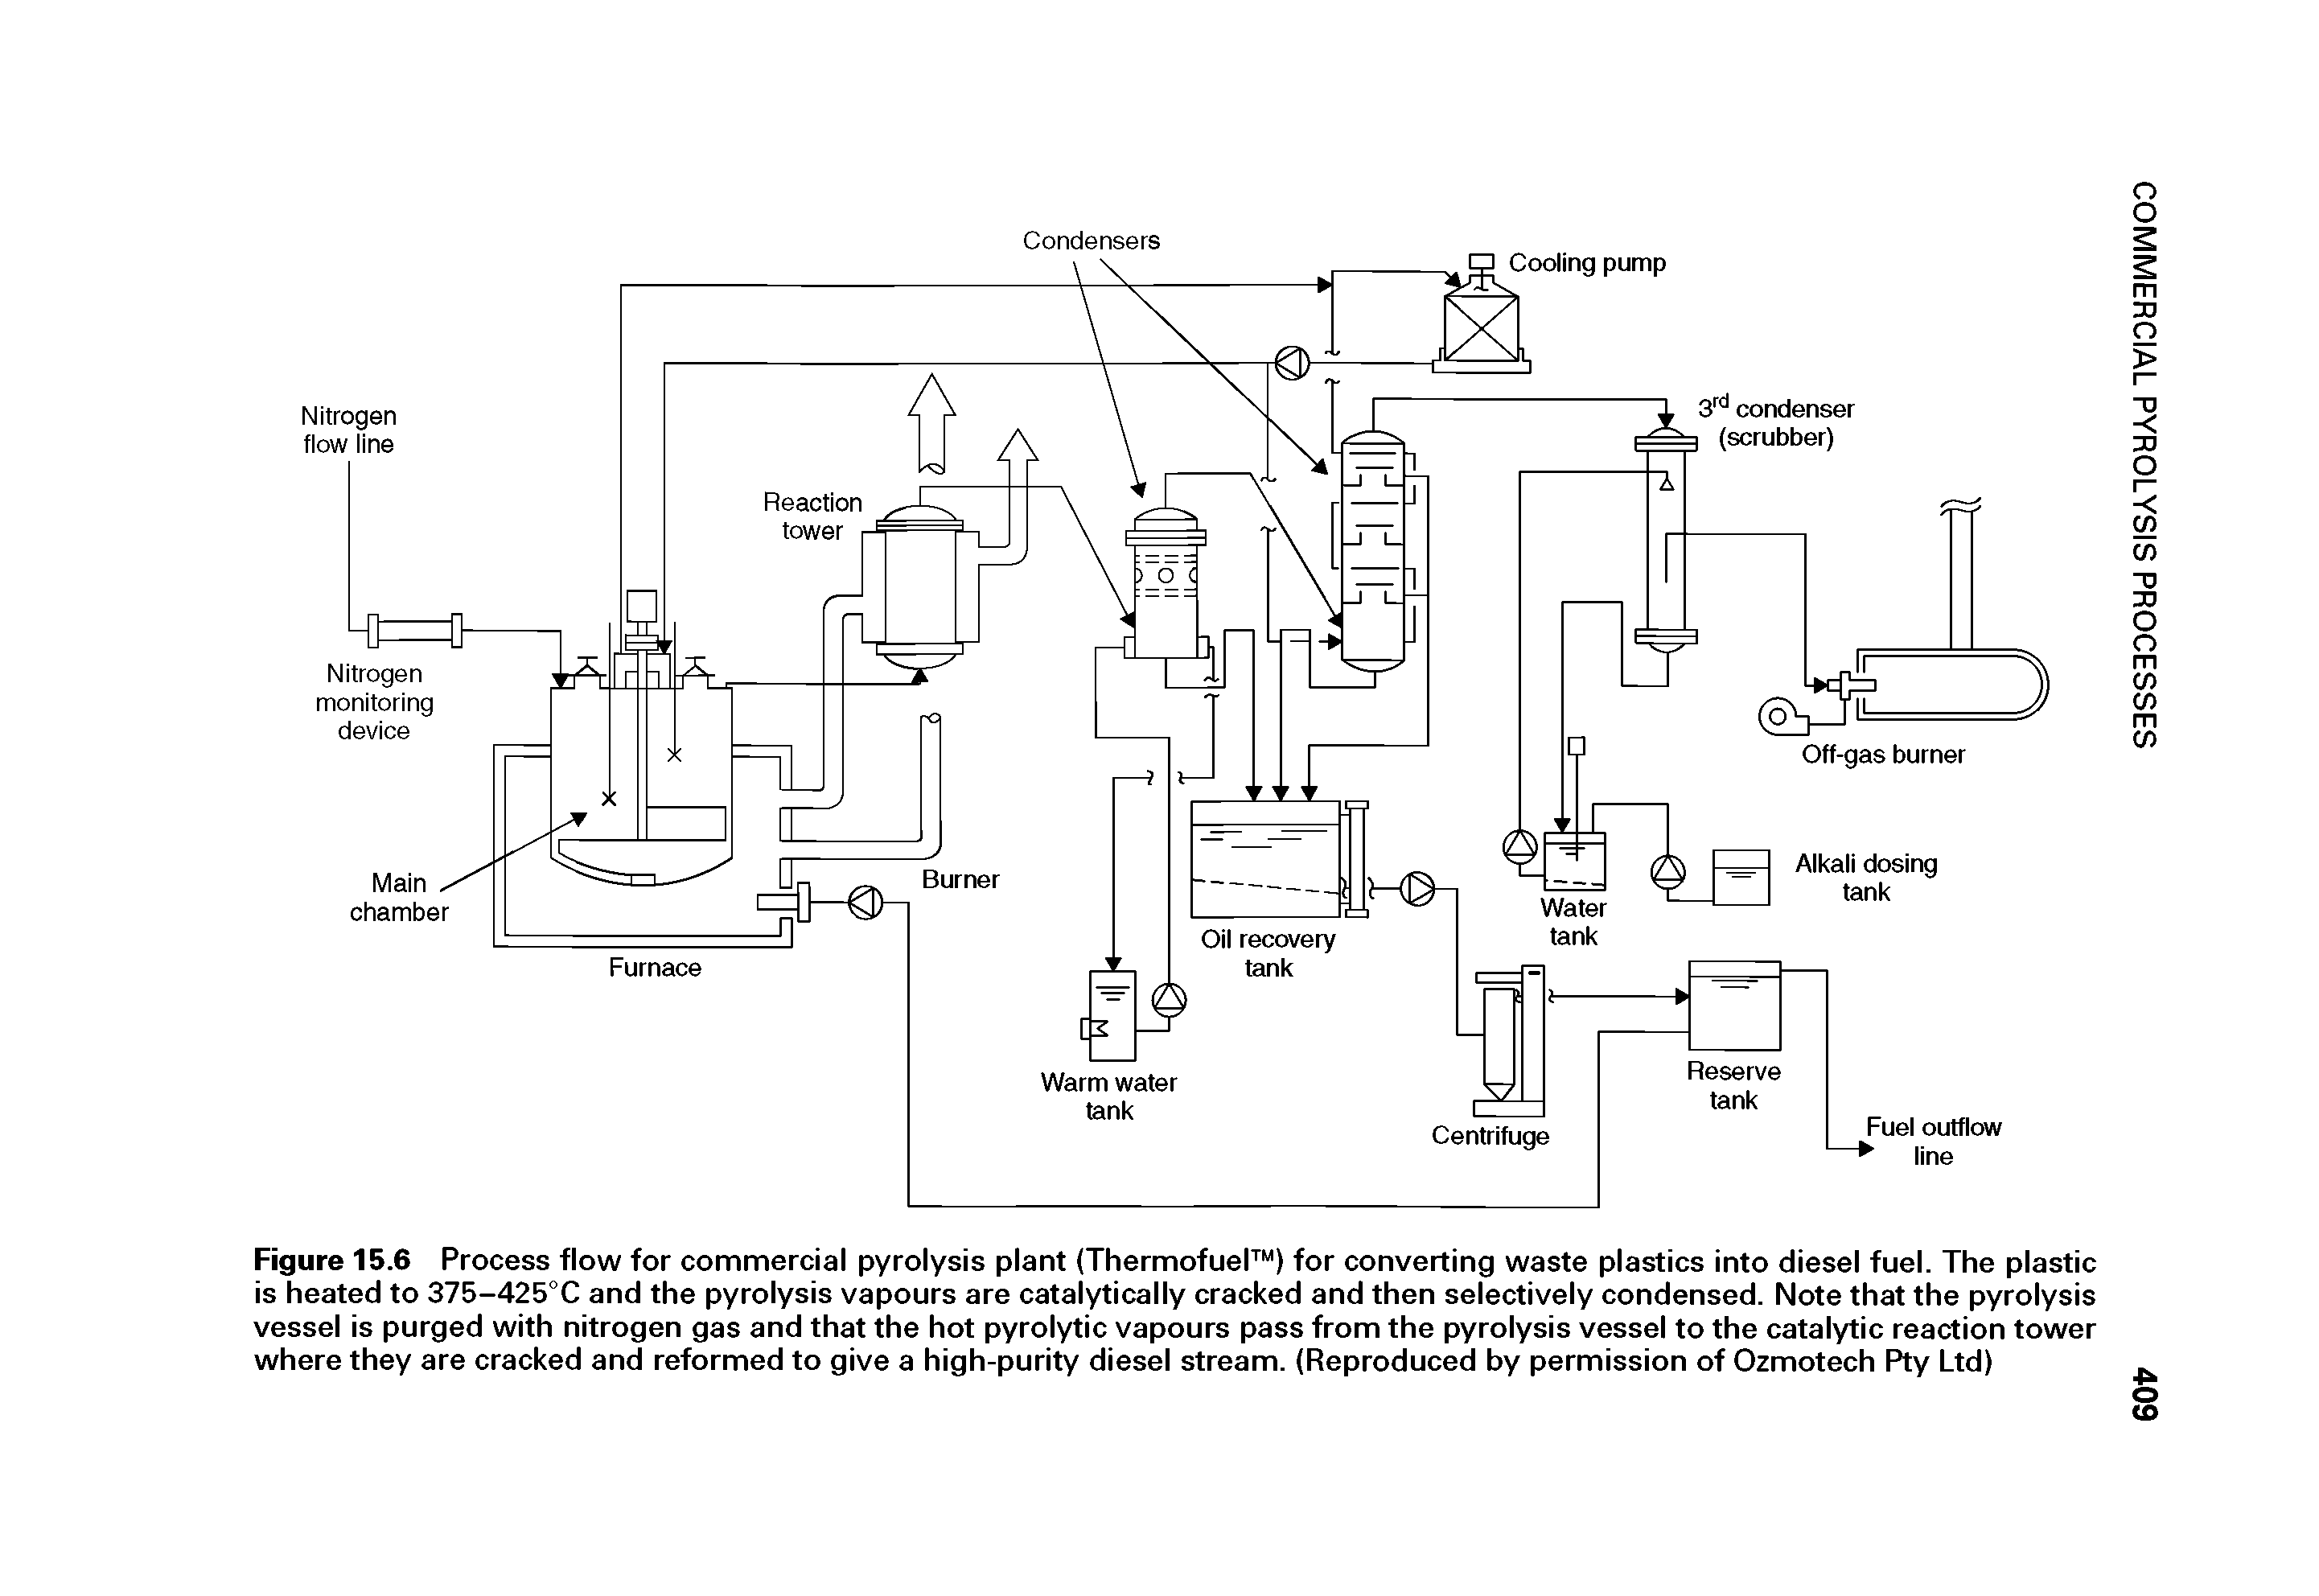 Figure 15.6 Process flow for commercial pyrolysis plant (Thermofuel ) for converting waste plastics into diesel fuel. The plastic is heated to 375-425°C and the pyrolysis vapours are catalytically cracked and then selectively condensed. Note that the pyrolysis vessel is purged with nitrogen gas and that the hot pyrolytic vapours pass from the pyrolysis vessel to the catalytic reaction tower where they are cracked and reformed to give a high-purity diesel stream. (Reproduced by permission of Ozmotech Pty Ltd)...